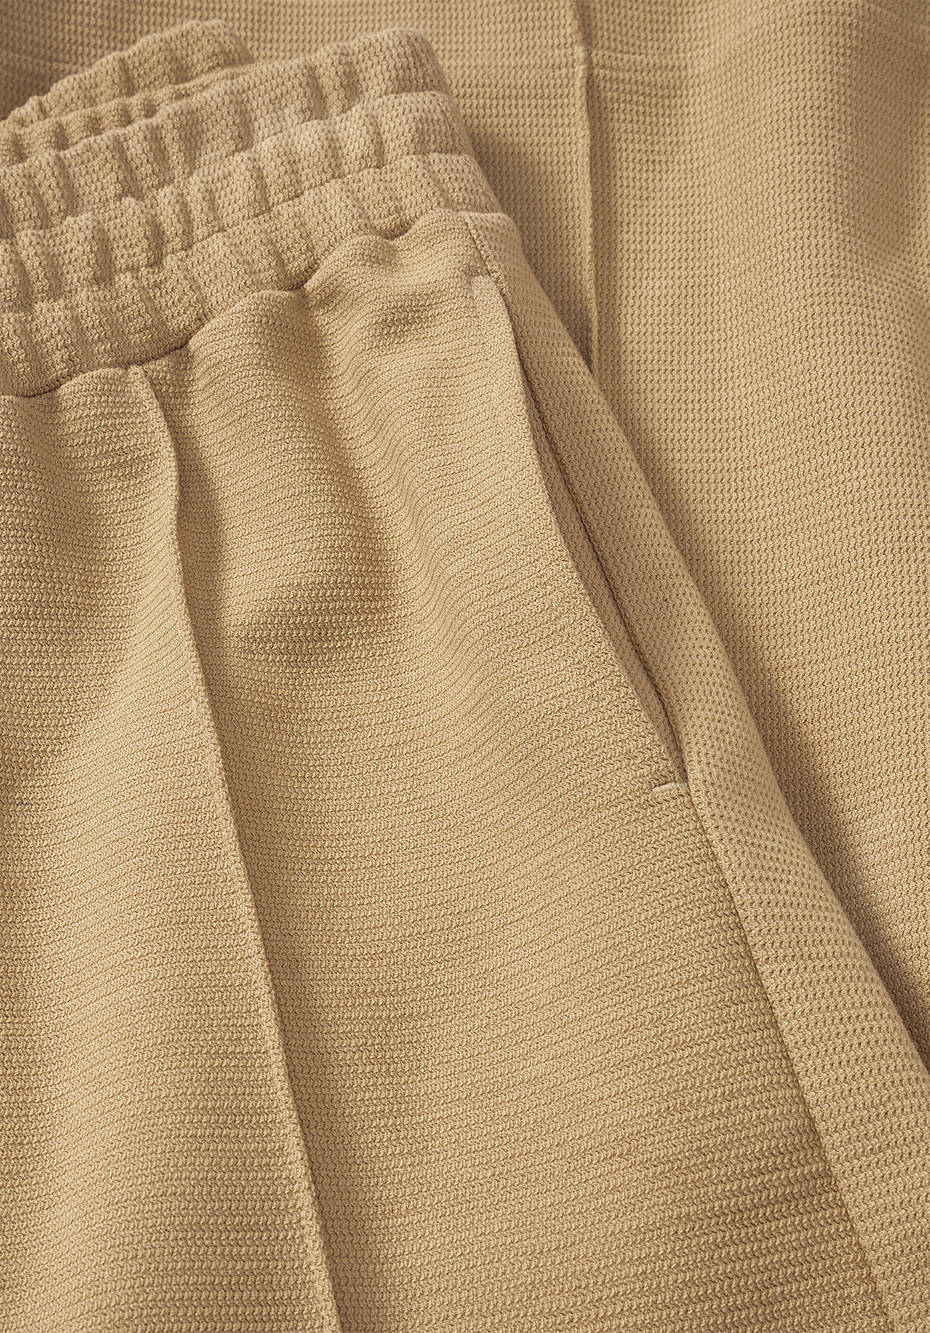 Wide sweatpants made from organic cotton with kapok